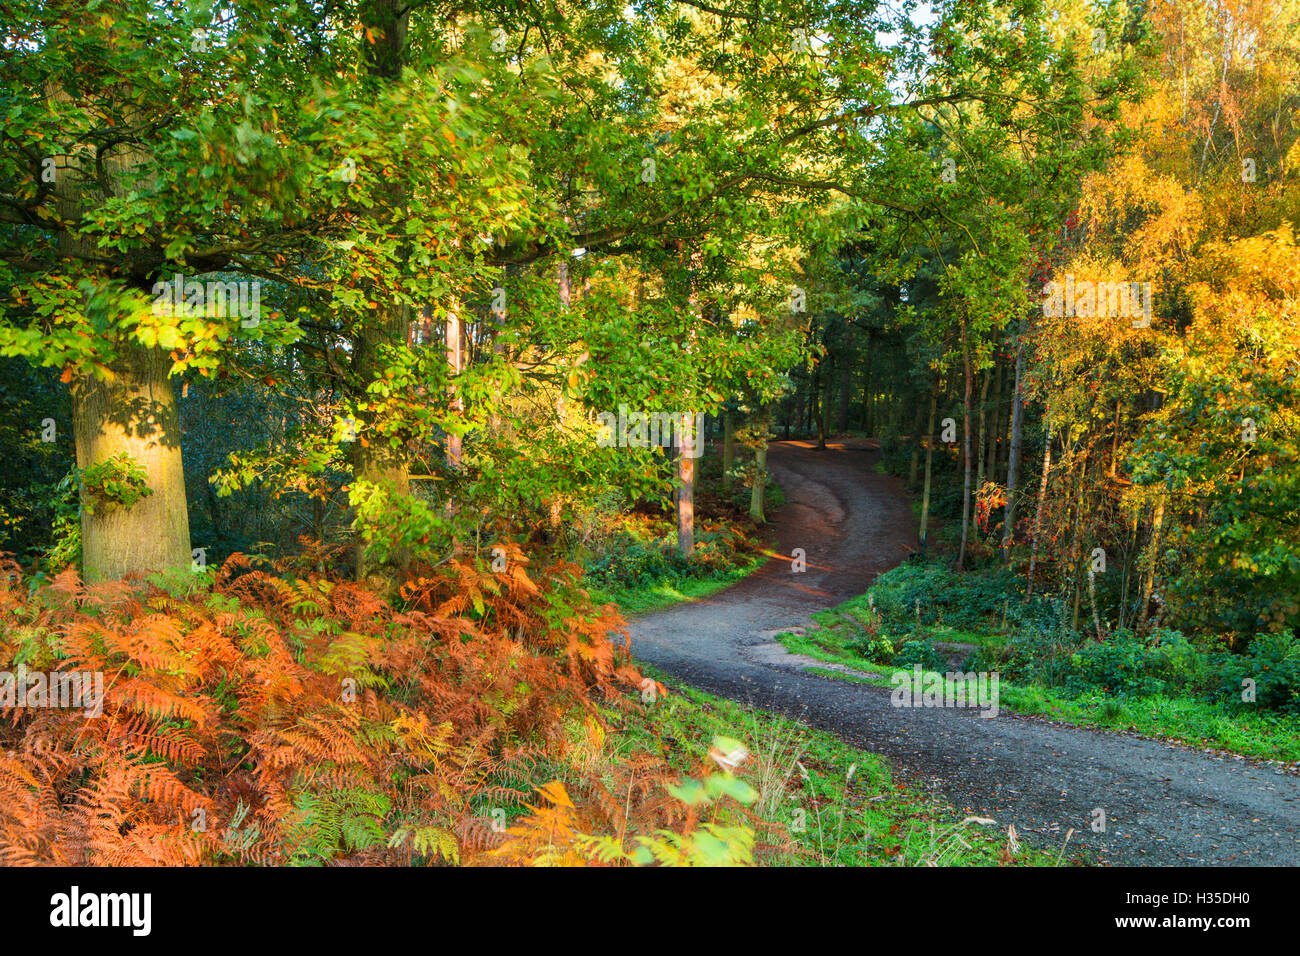 A track leads into Delamere Forest with autumn colour filling the landscape, Cheshire, England, UK Stock Photo